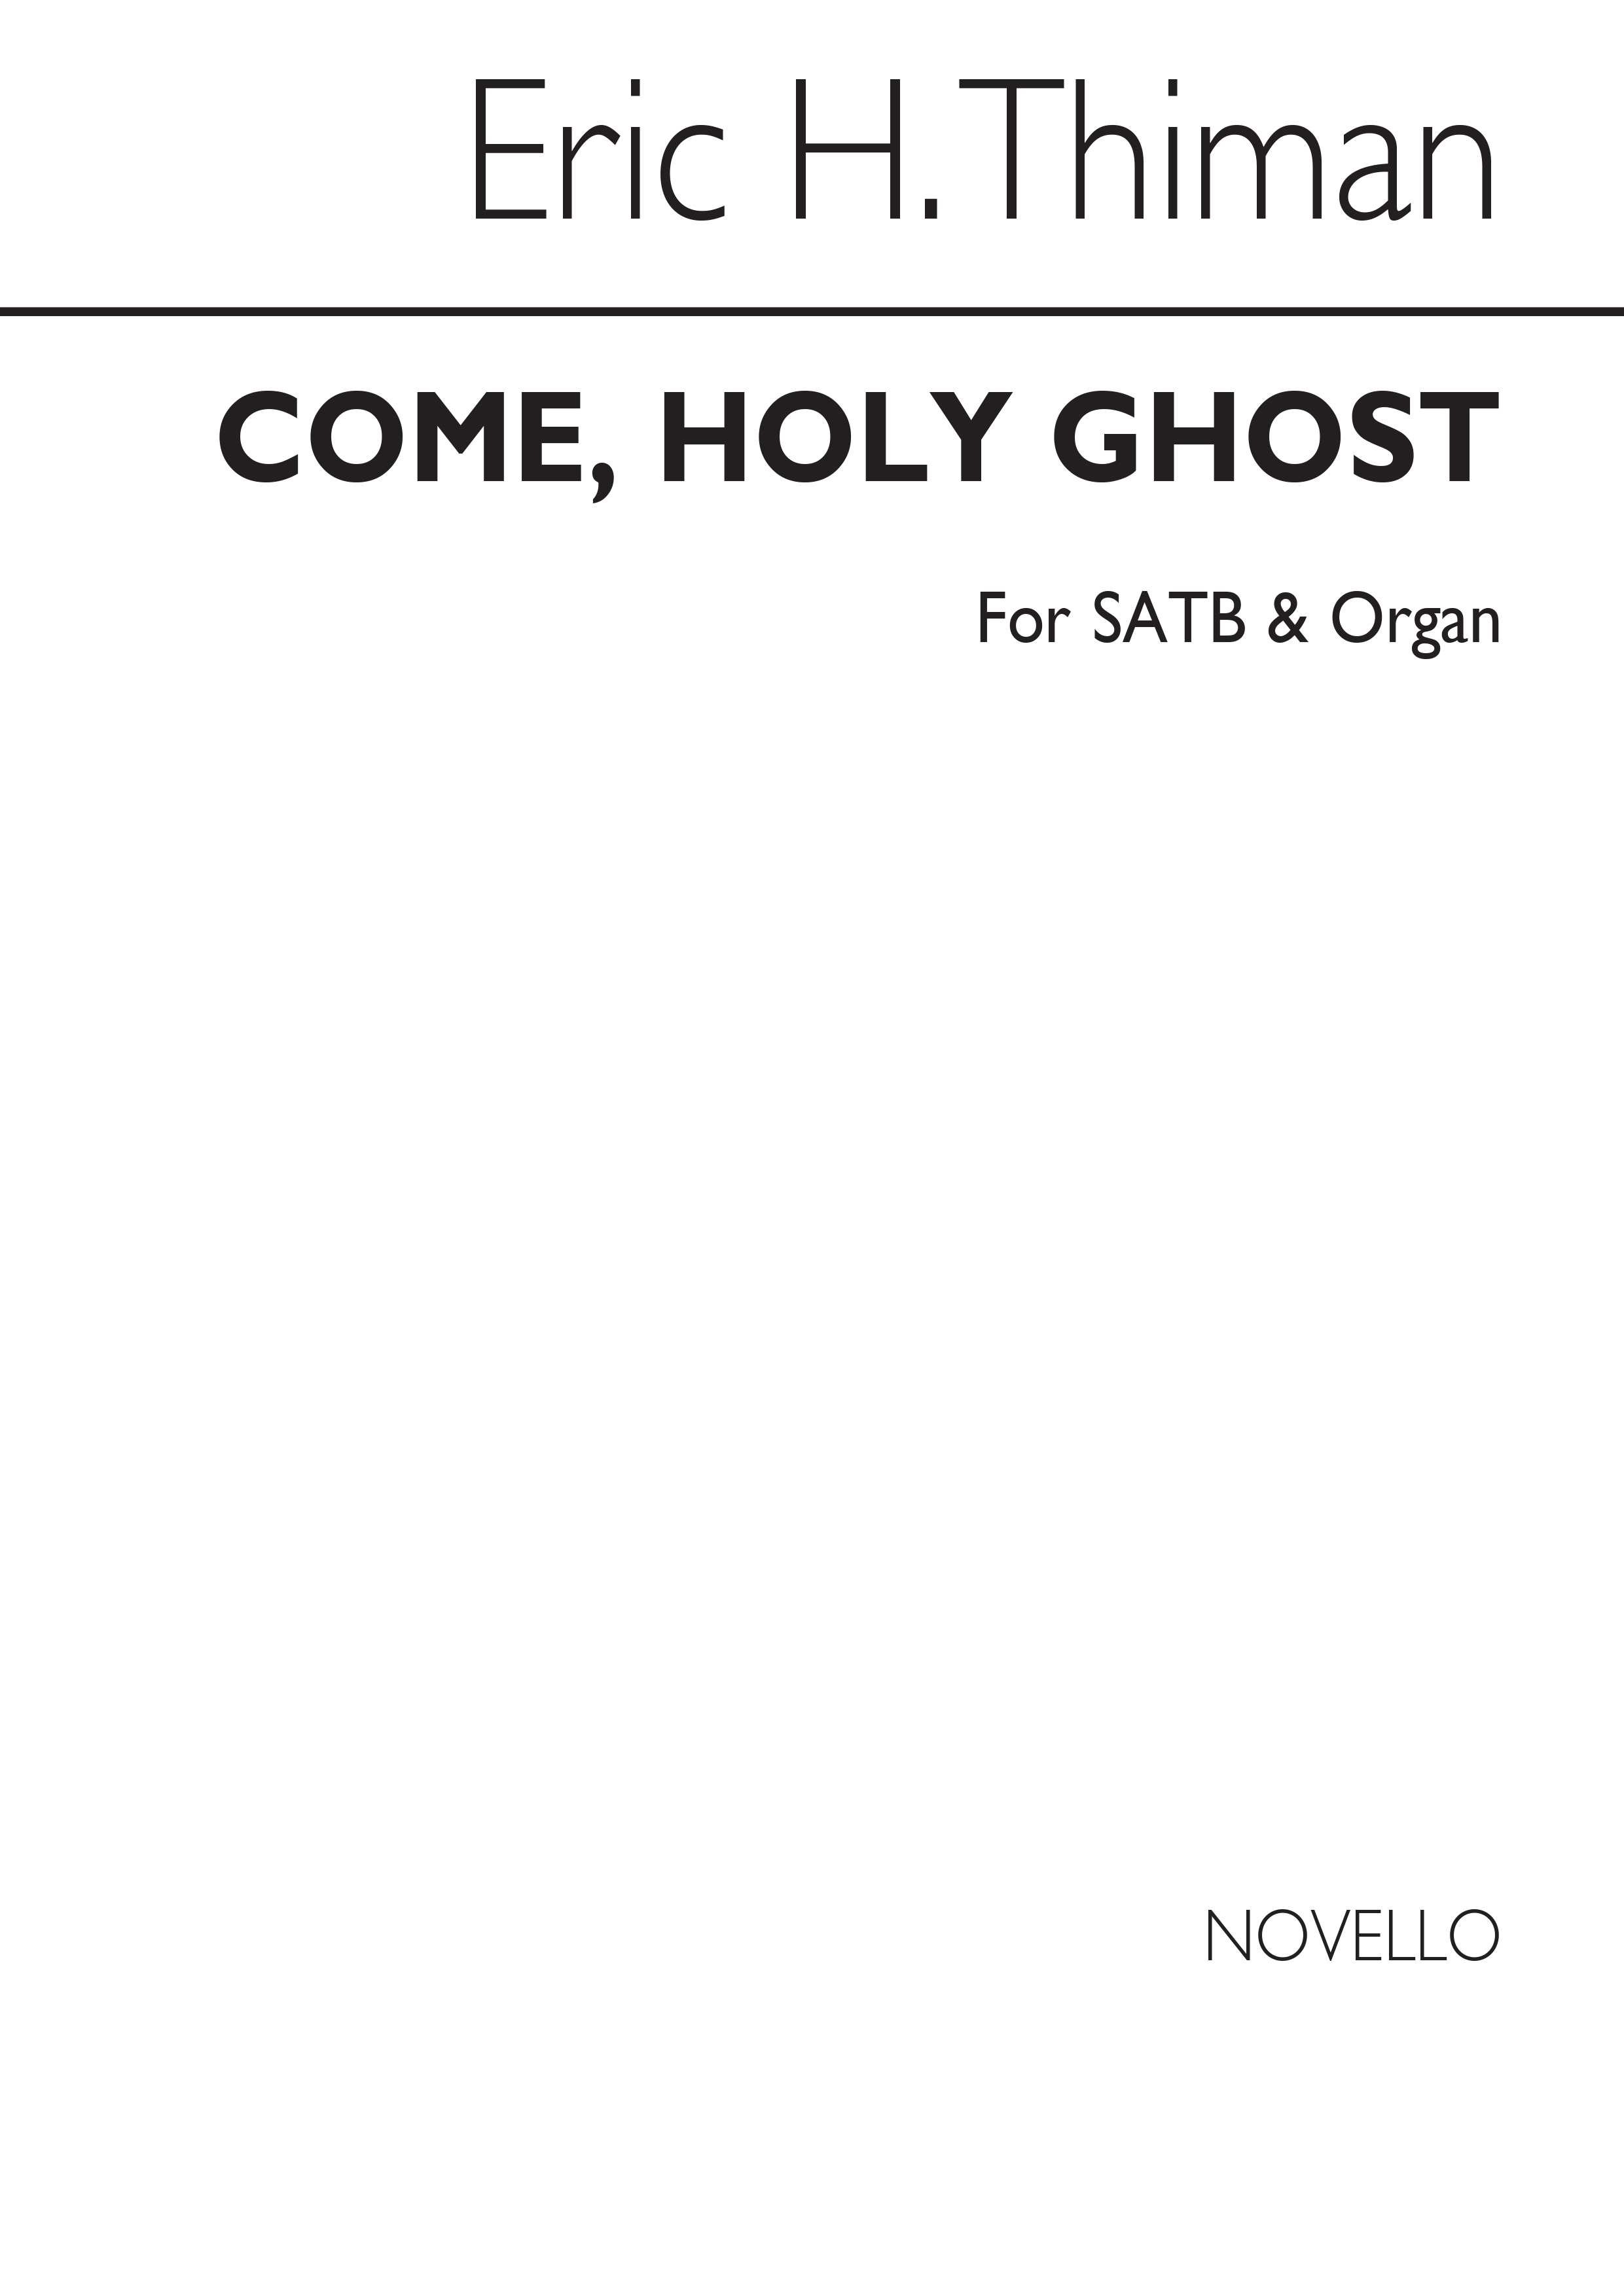 Eric Thiman: Come, Holy Ghost